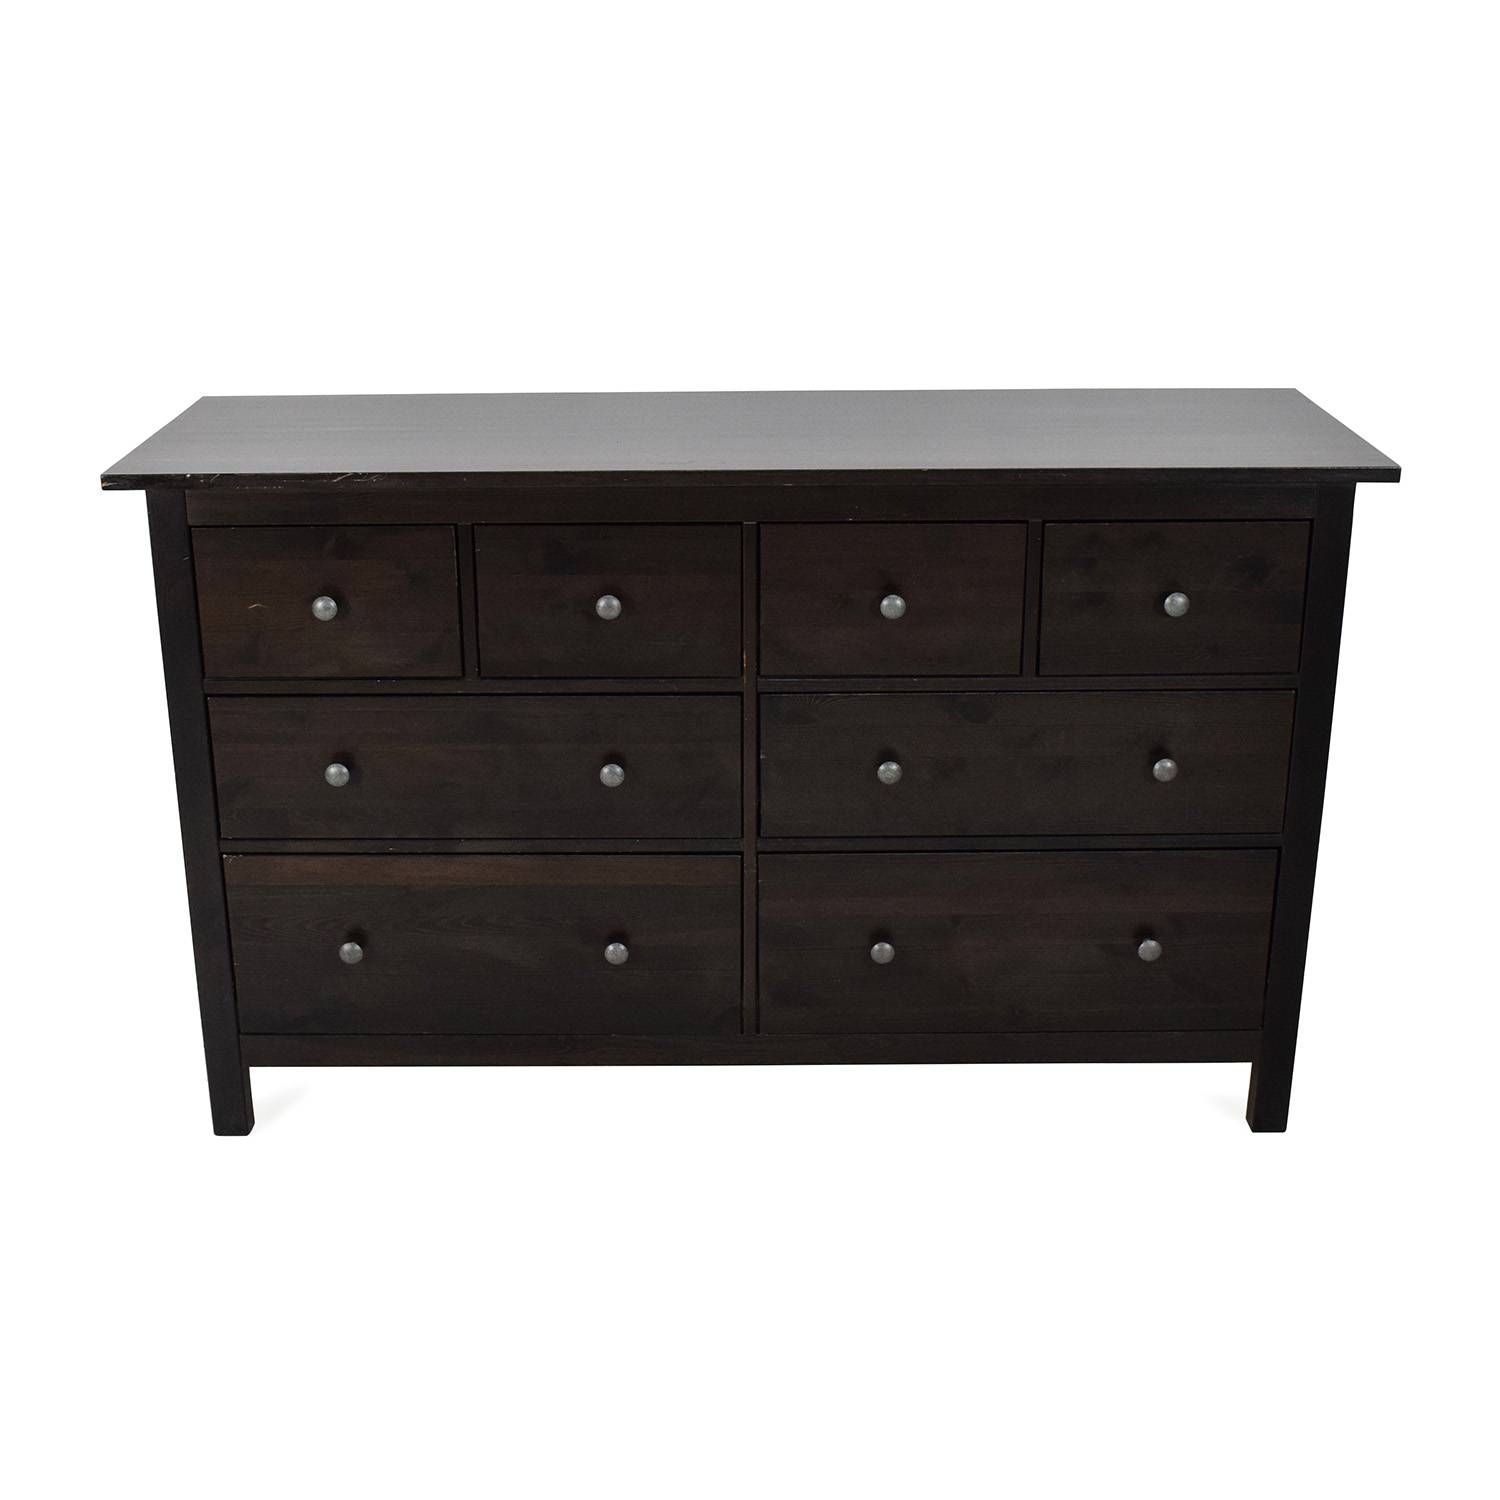 62% Off – Ikea Ikea Hemnes Dresser / Storage Intended For Second Hand Dressers And Sideboards (View 15 of 15)